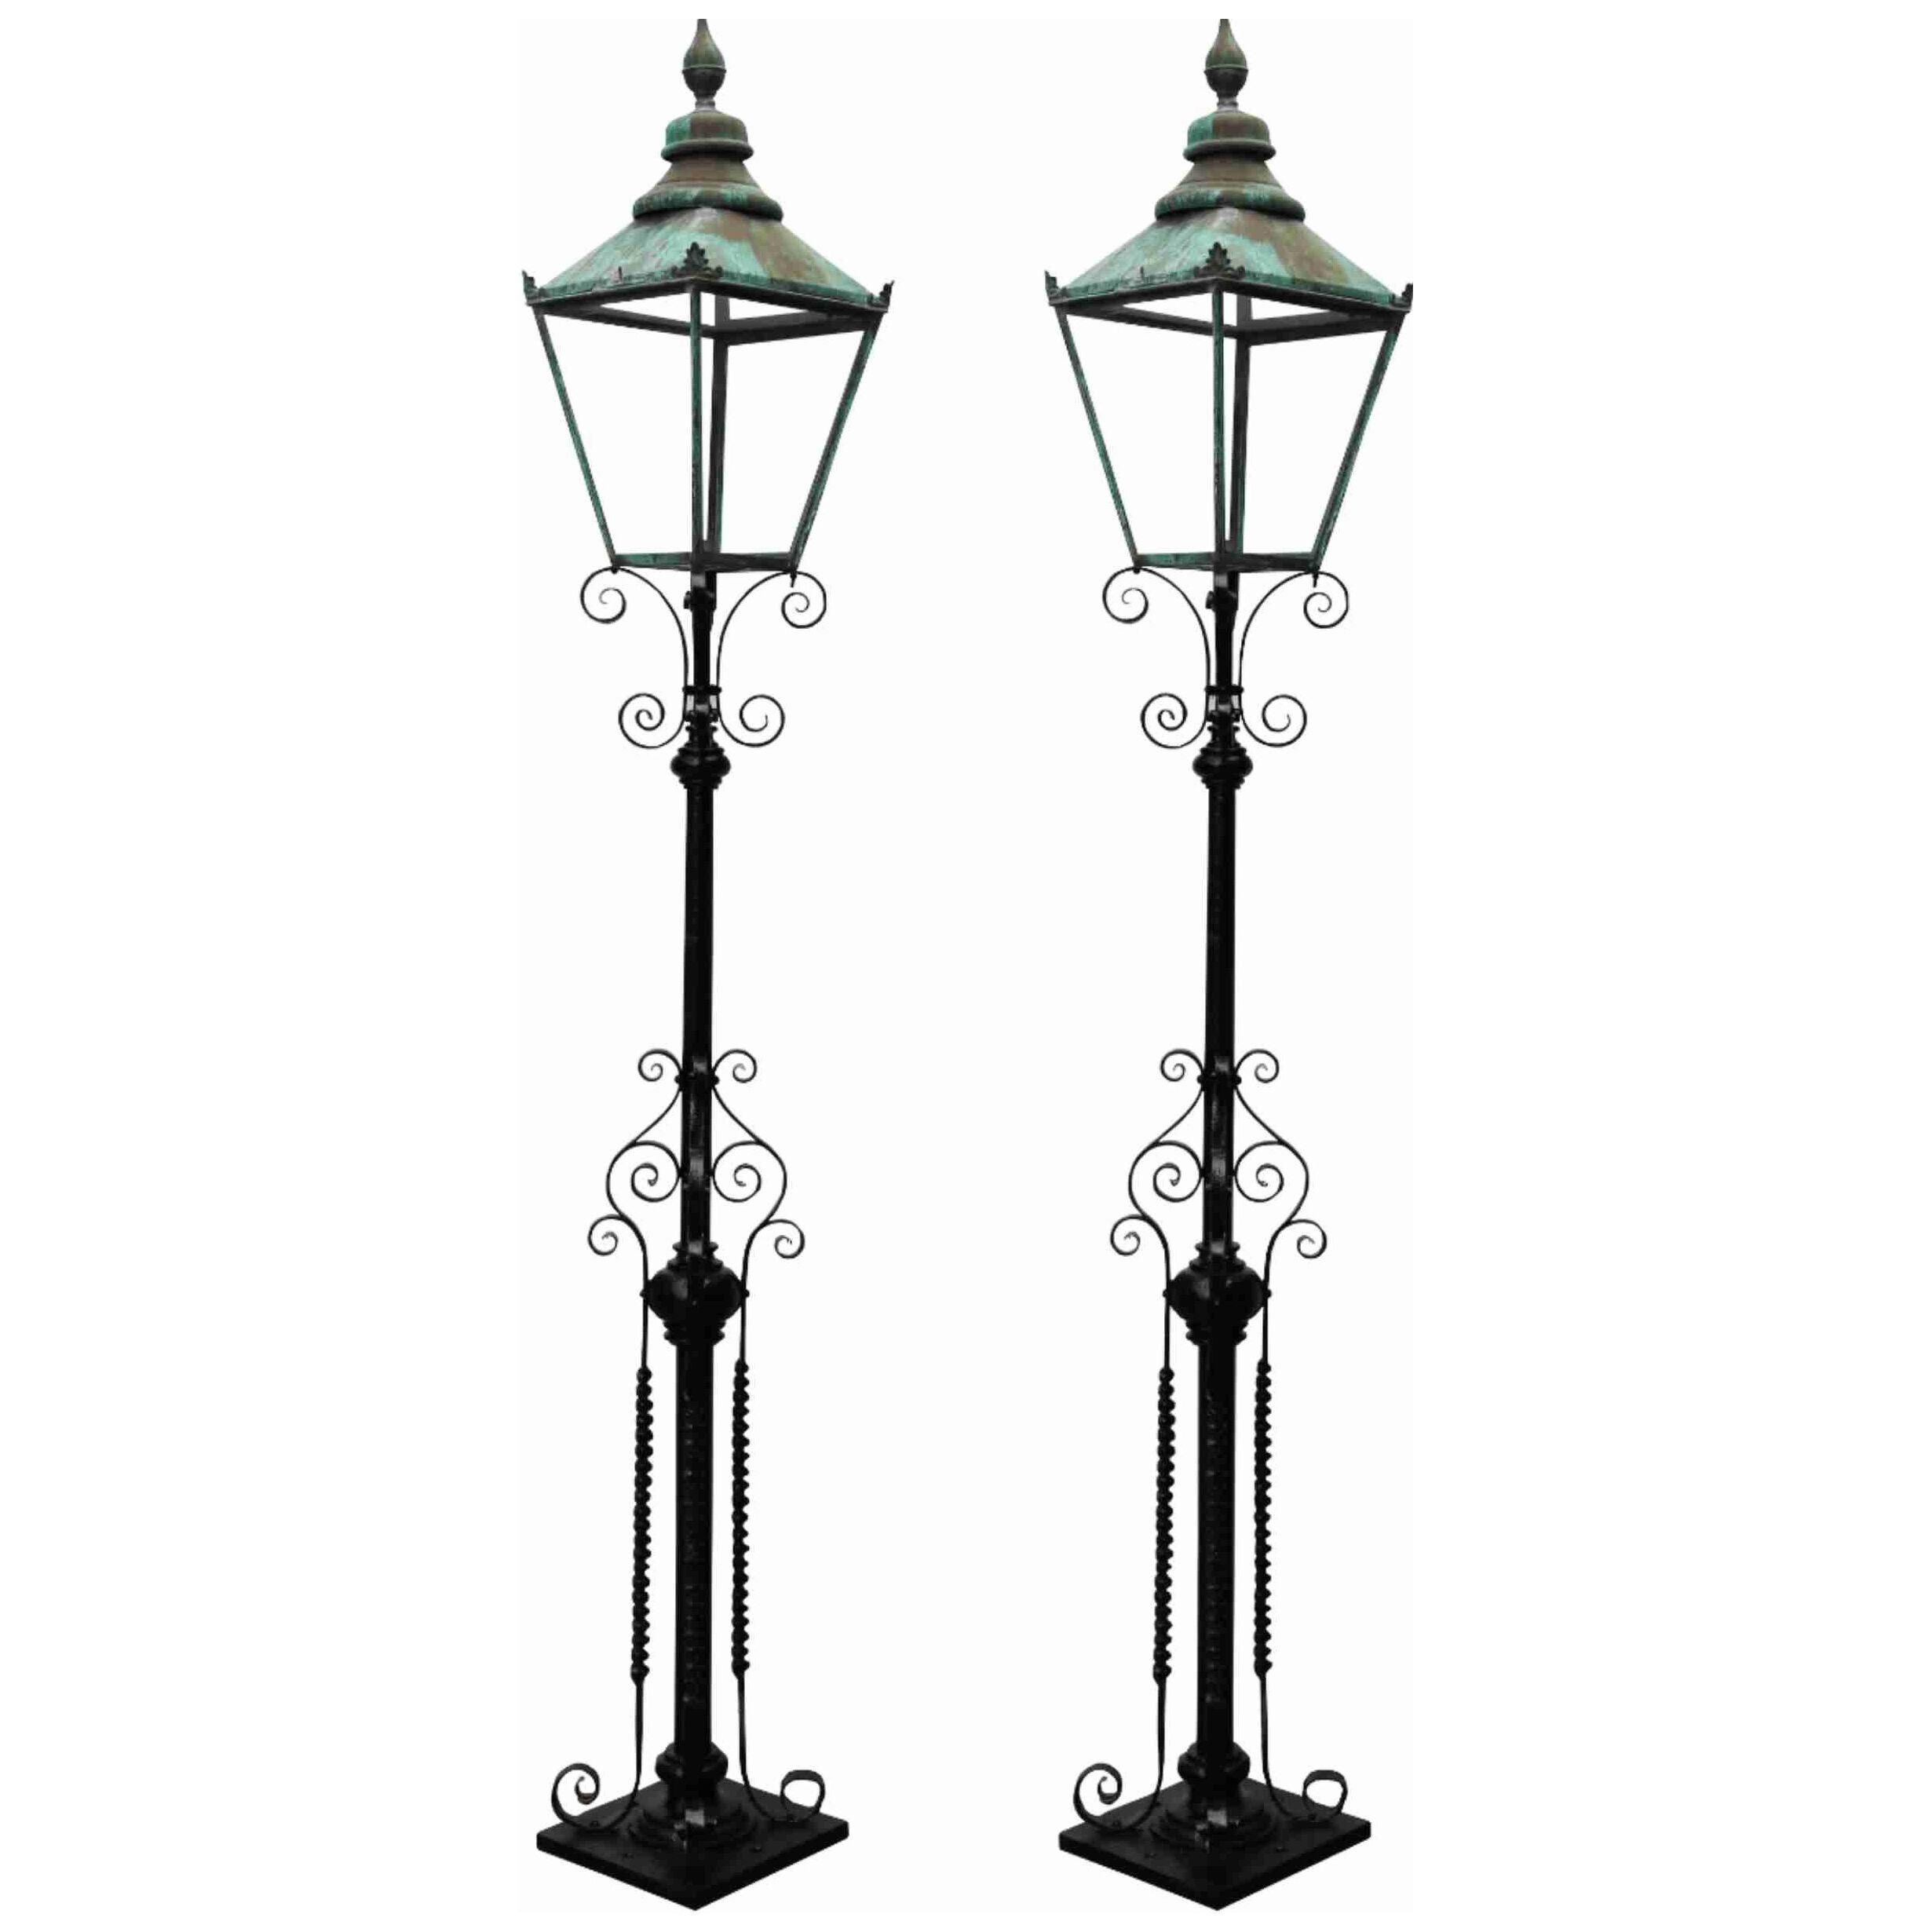 A Pair of Antique Reclaimed Victorian Lamp Posts